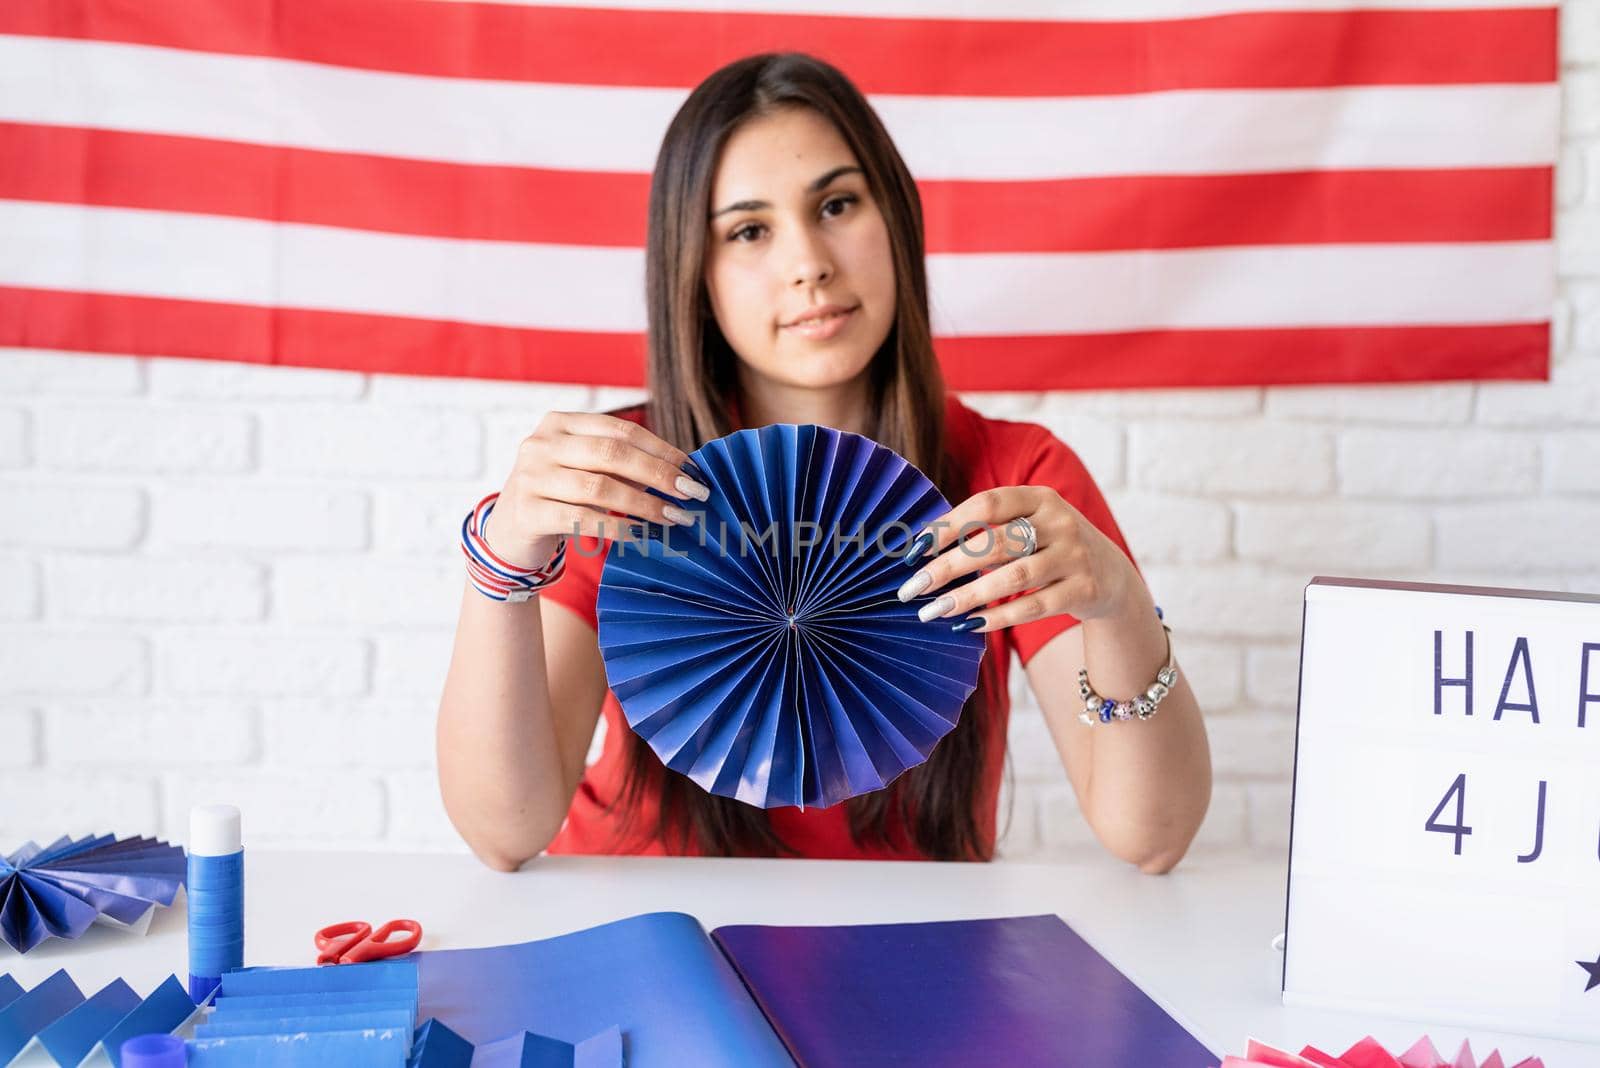 Independence day of the USA. Happy July 4th. Beautiful woman making DIY paper fans of red and blue colors to celebrate July 4th. Happy 4 July the text on the lightbox